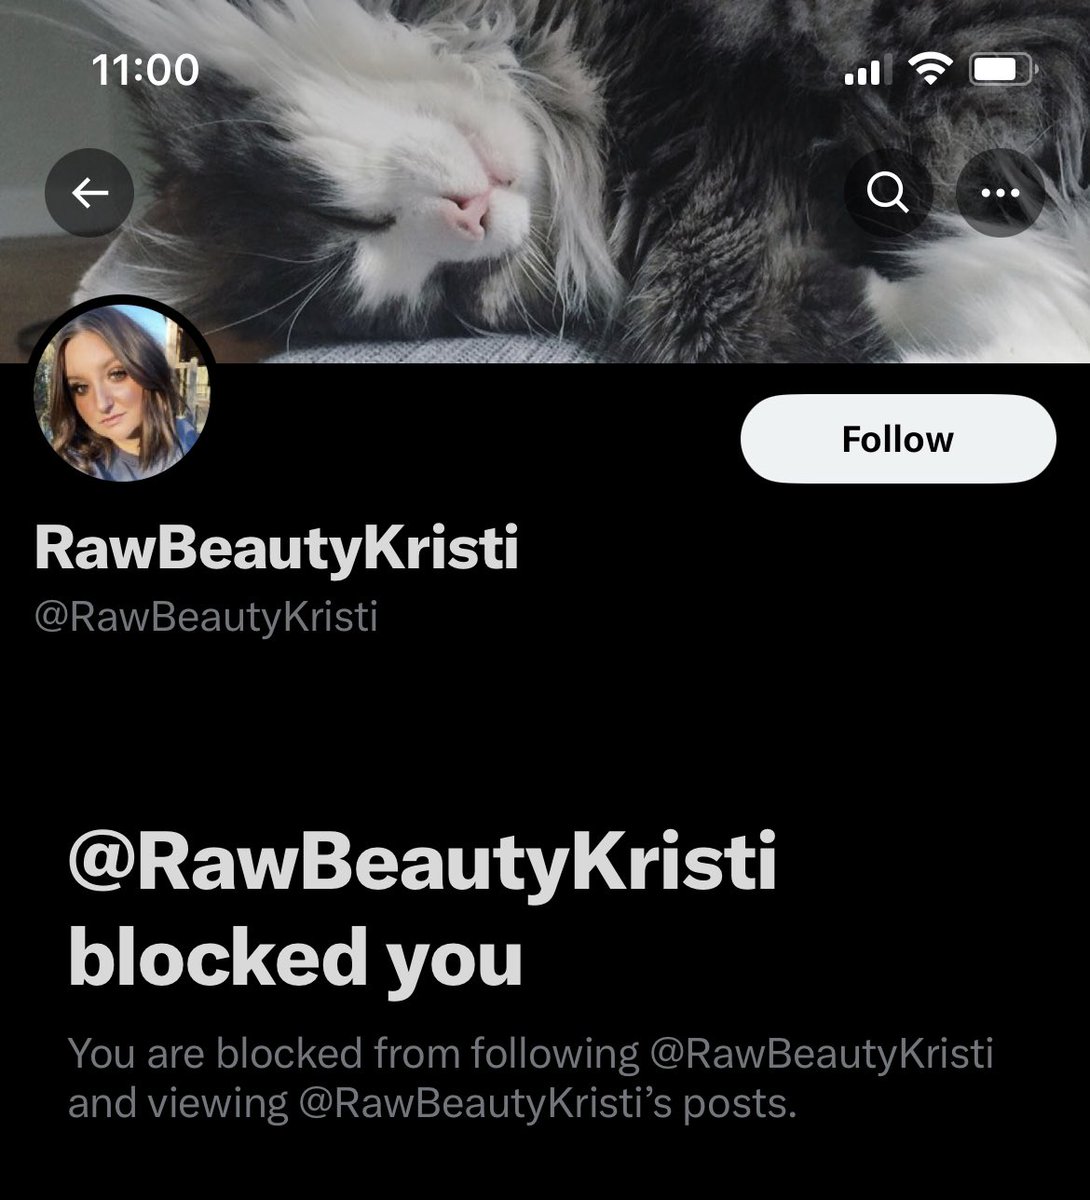 RawBeautyKristi continues to block people for calling her a predator protector which she is!